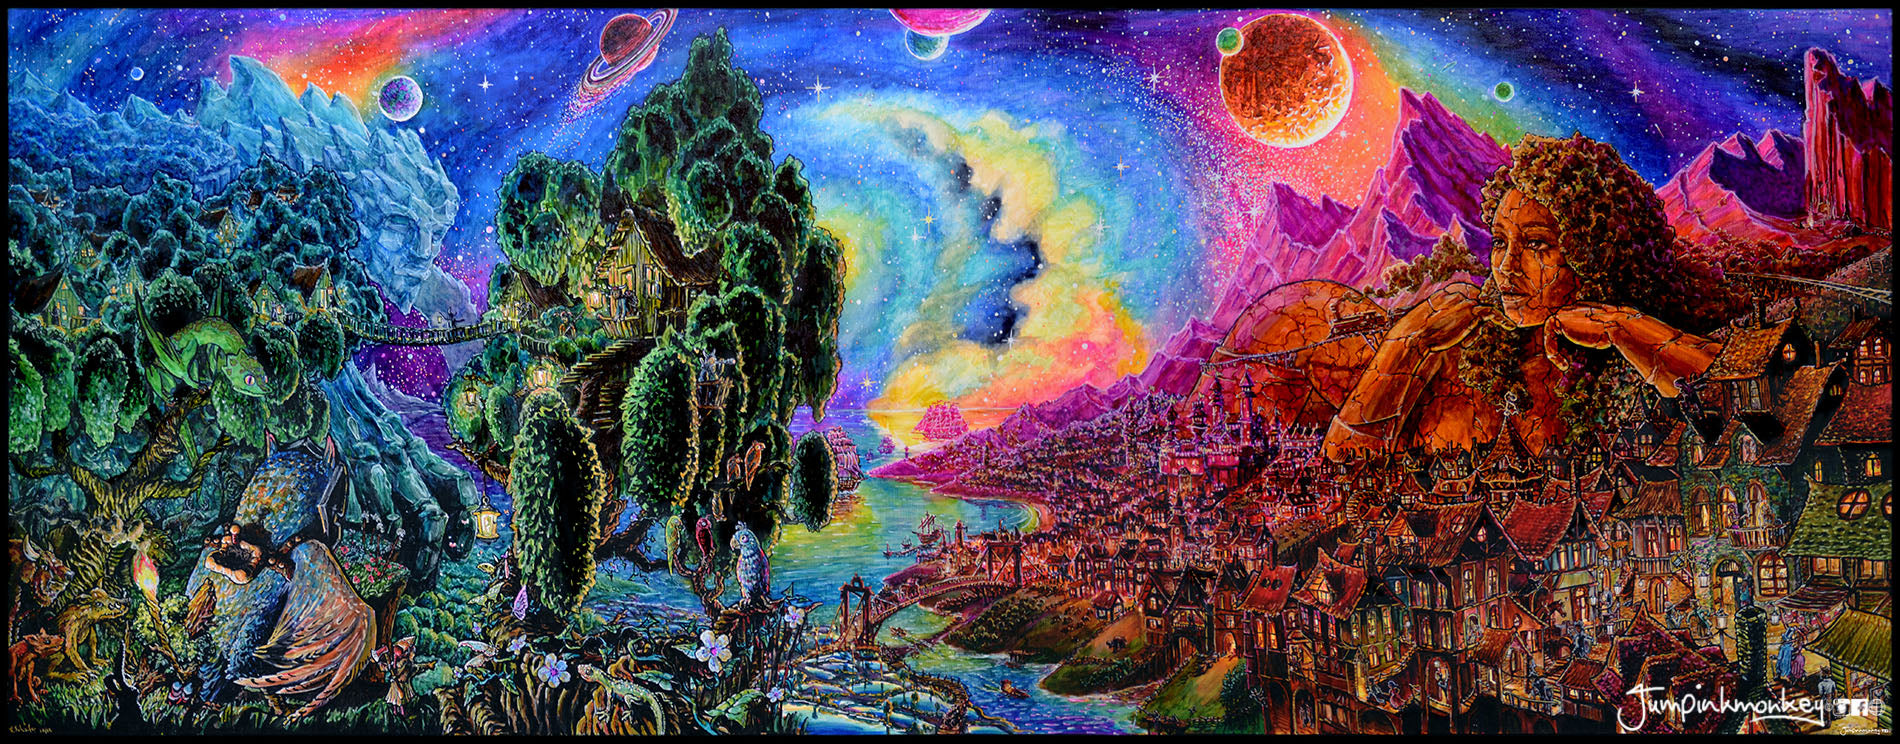 Colorful fantasy world with giants and magic creatures.